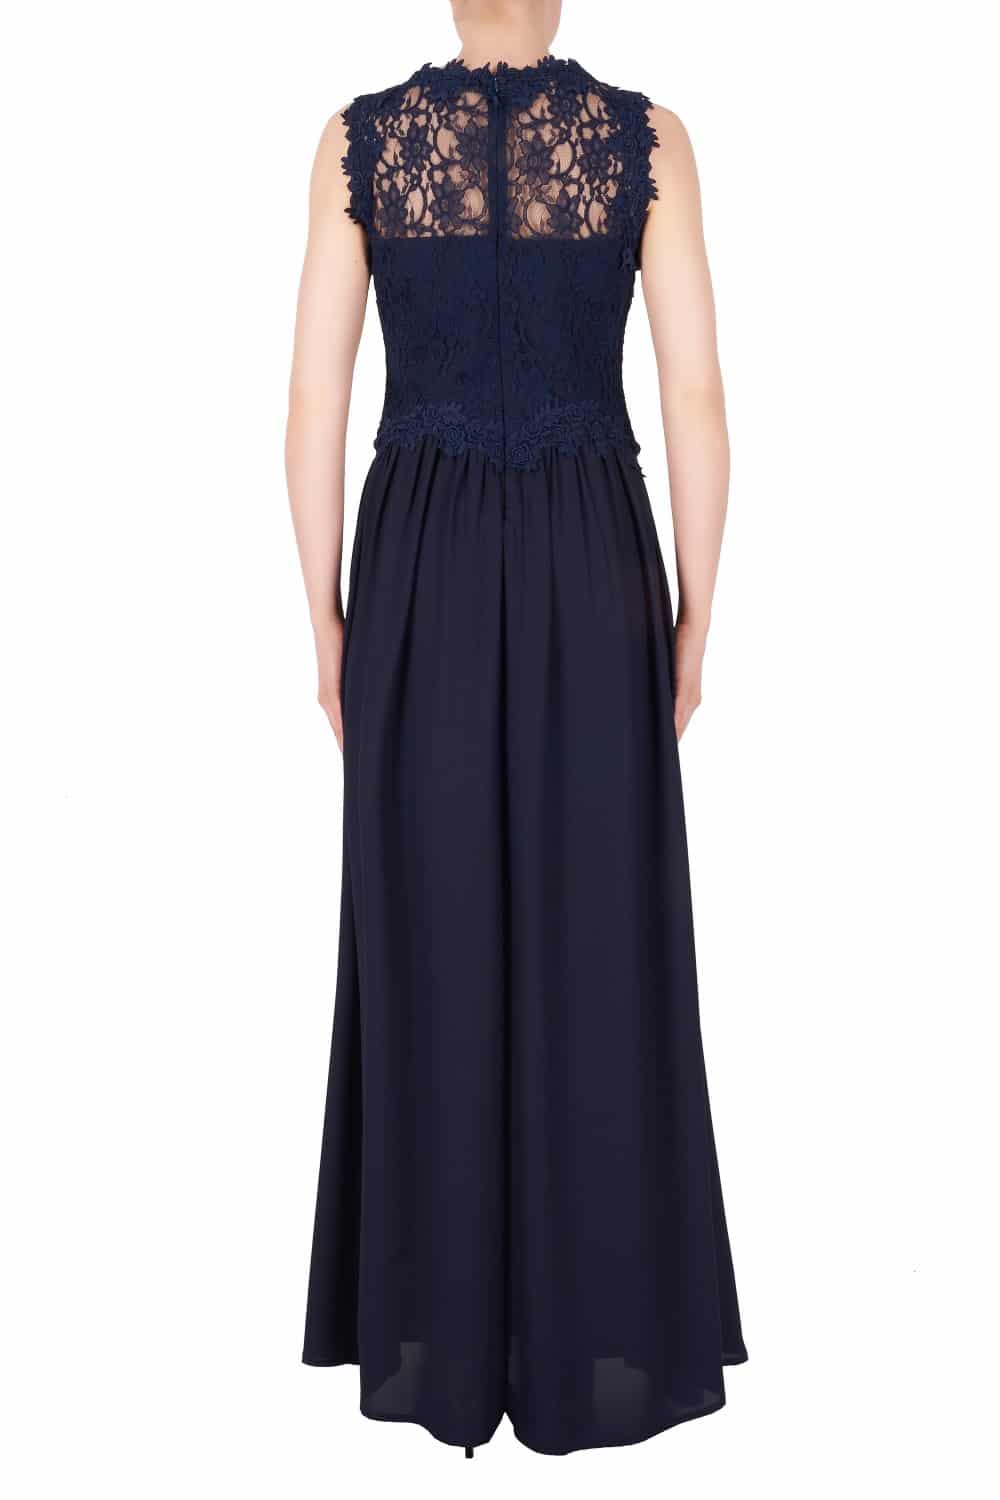 Joseph Ribkoff Dress Style 191516 Midnight-Blue from BelleMiaBoutique.com 